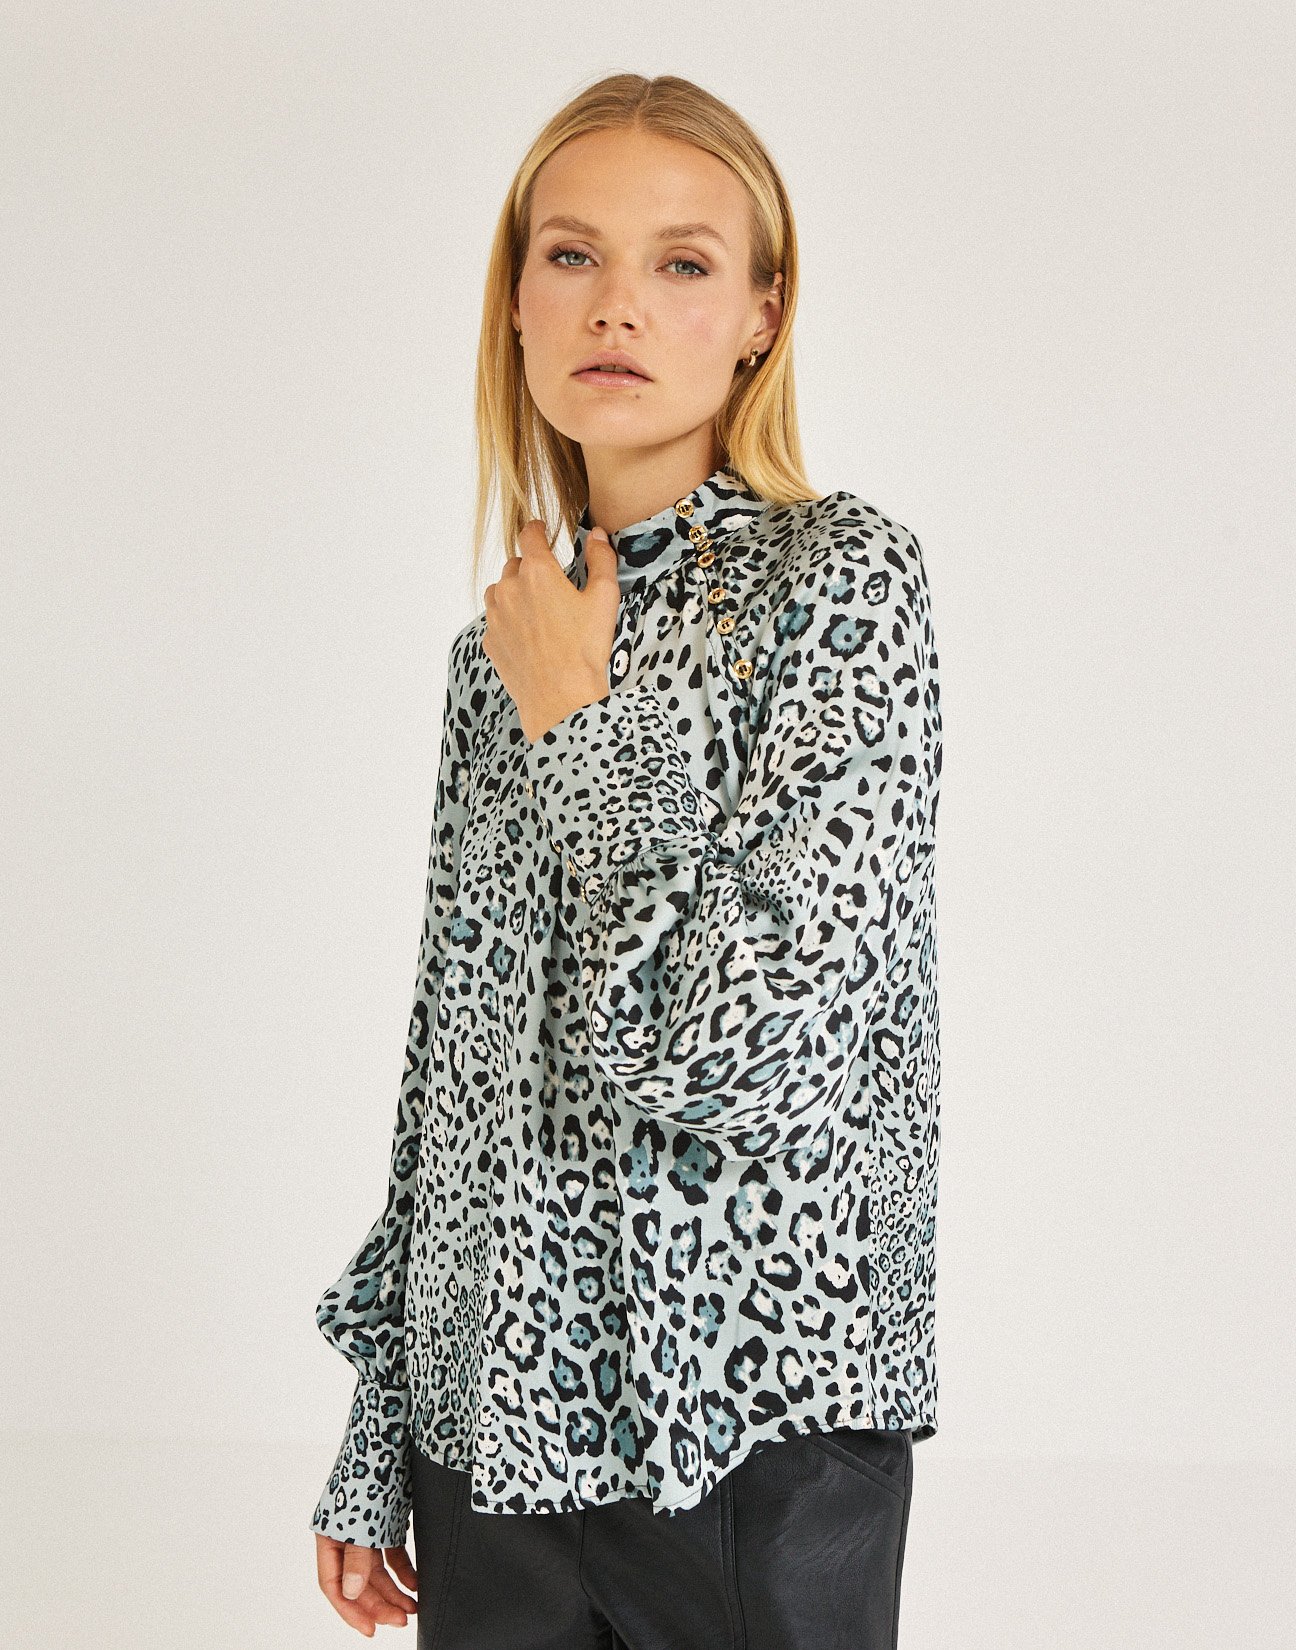 Animal print top with buttons